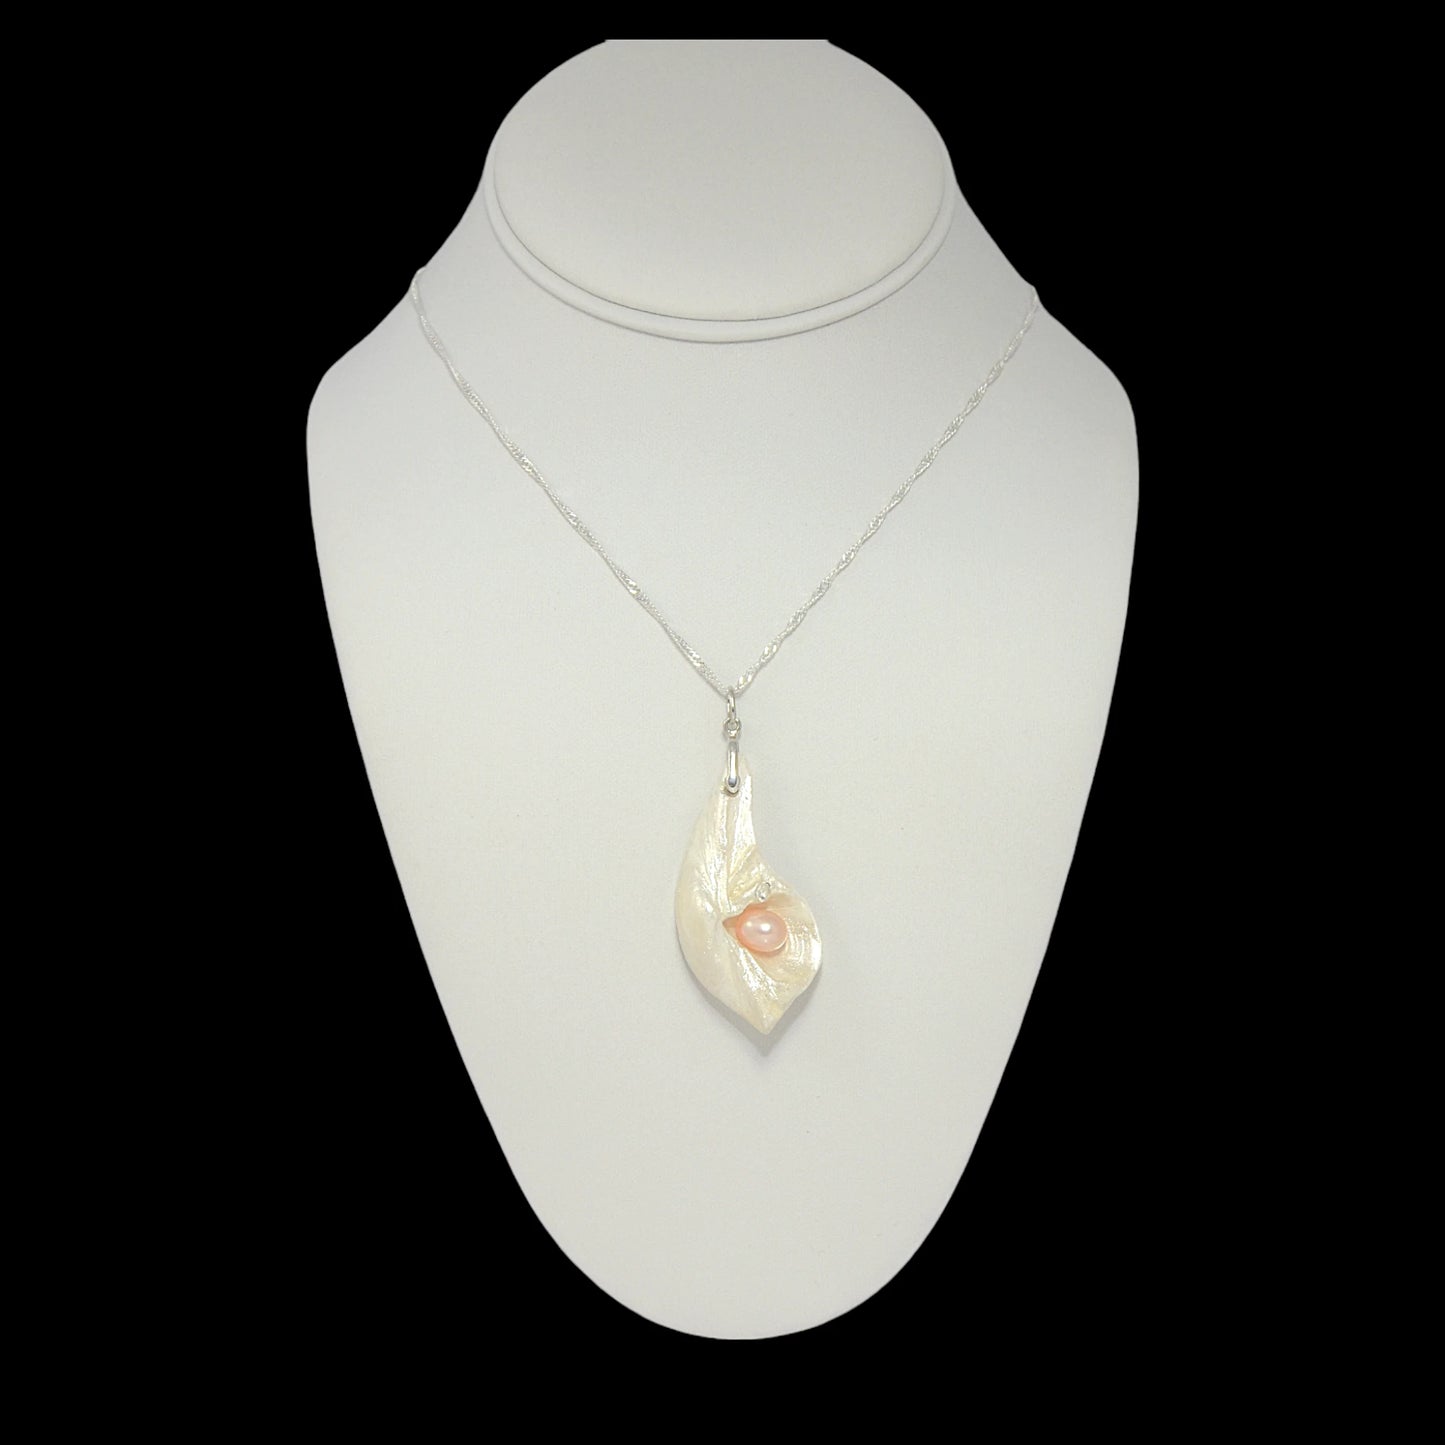 Athena is the name of the pendant being showcased.  It is a natural seashell from the beaches of Vancouver Island. The pendant has a real pink freshwater pearl and a faceted herkimer diamond. It is being showcased with a necklace on a neck displayer.